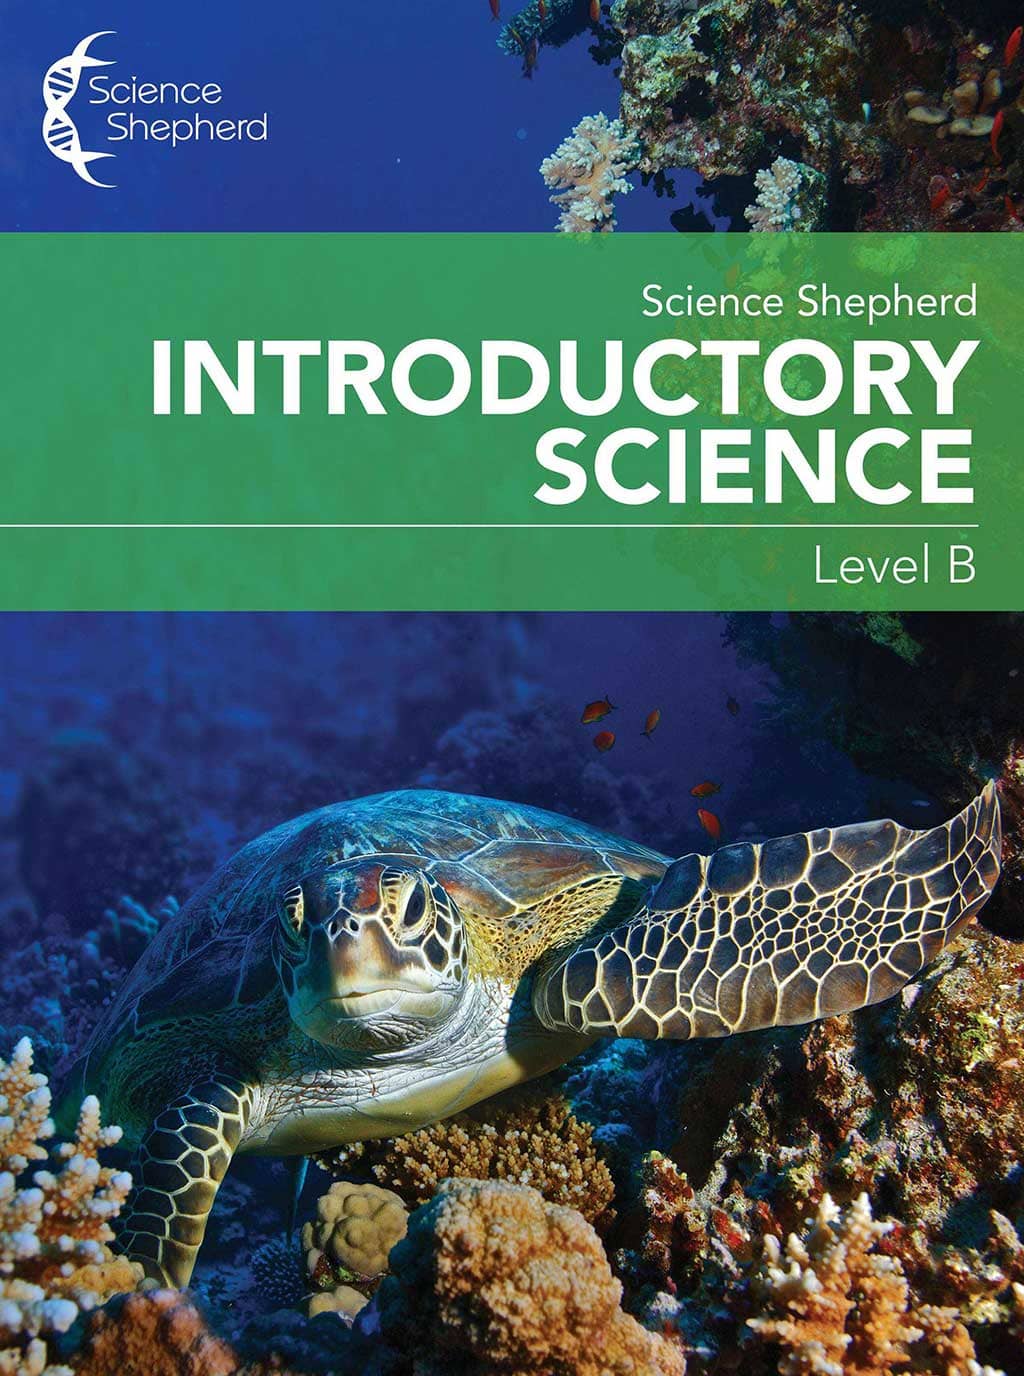 Christian homeschool curriculum Introductory Science Workbook Level B cover of a turtle underwater